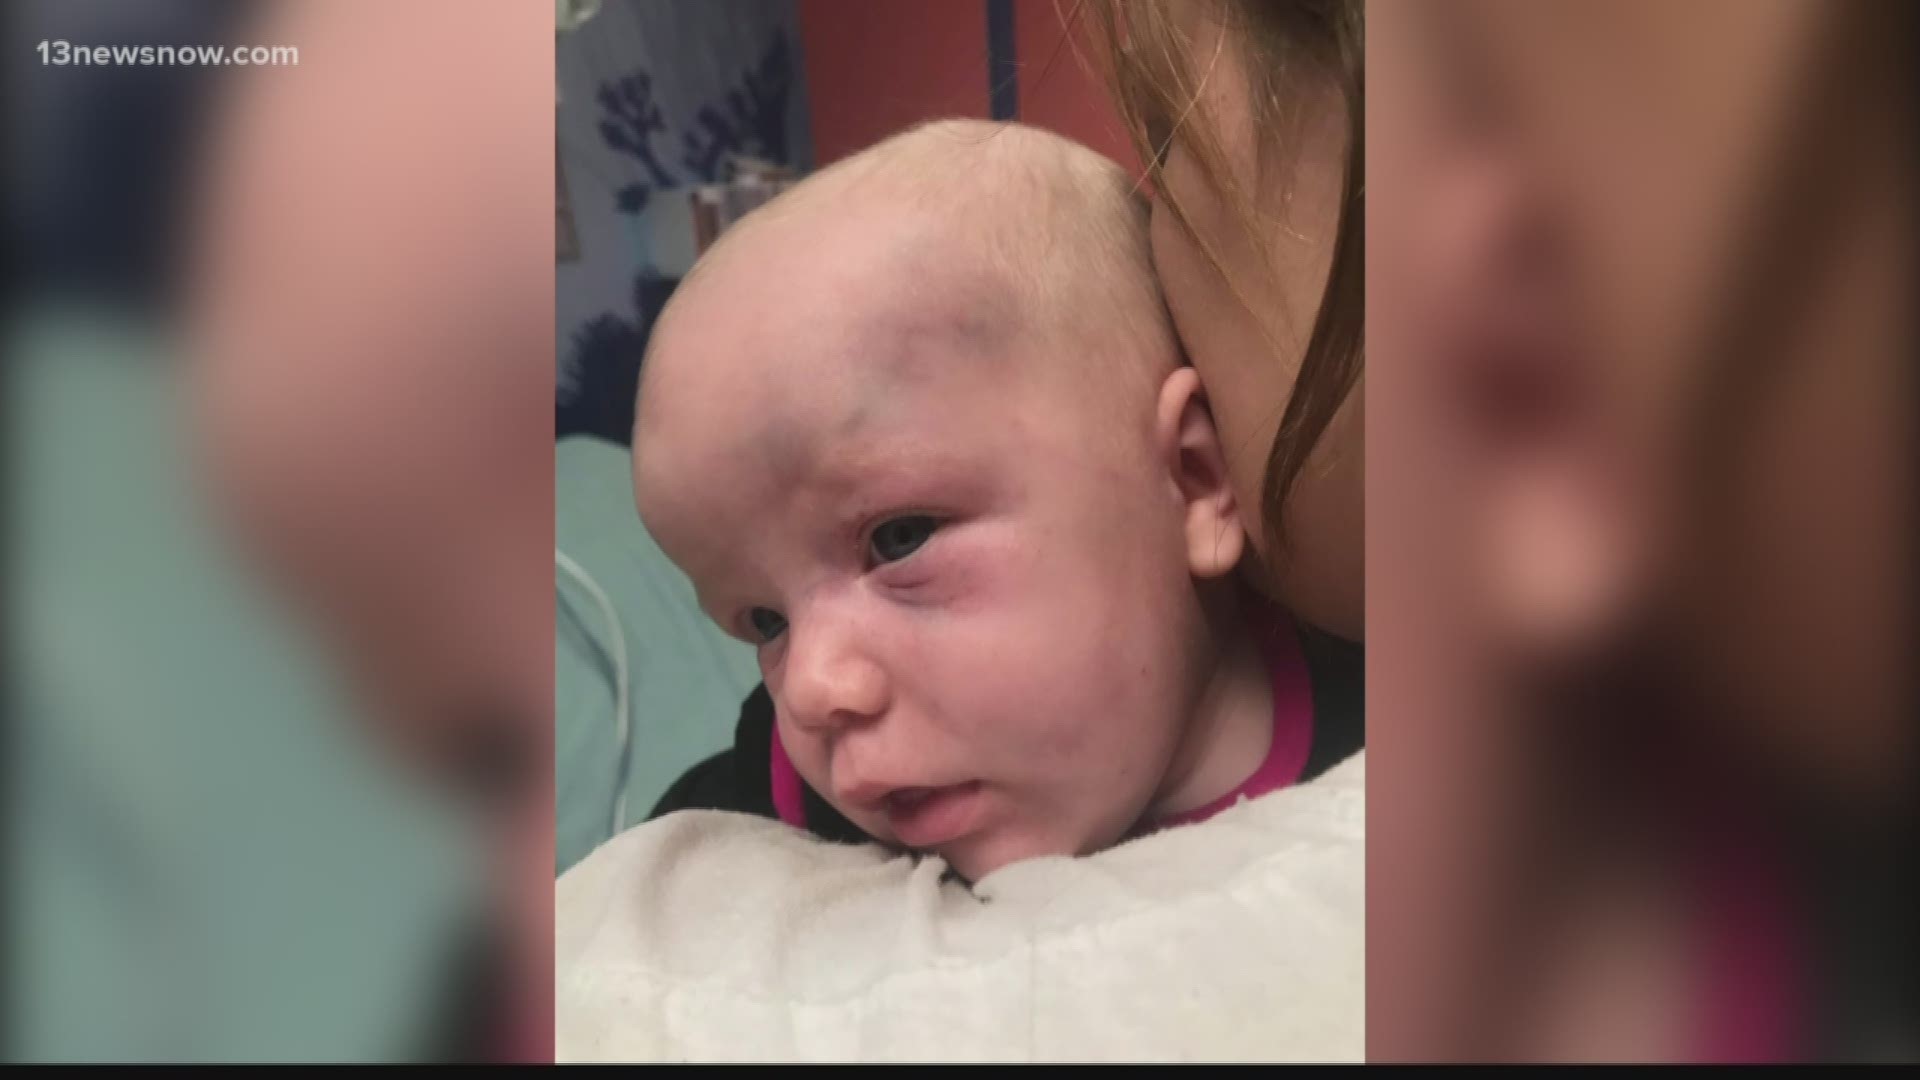 A baby was bruised and taken to a local hospital after their sitter hit a baby Harper